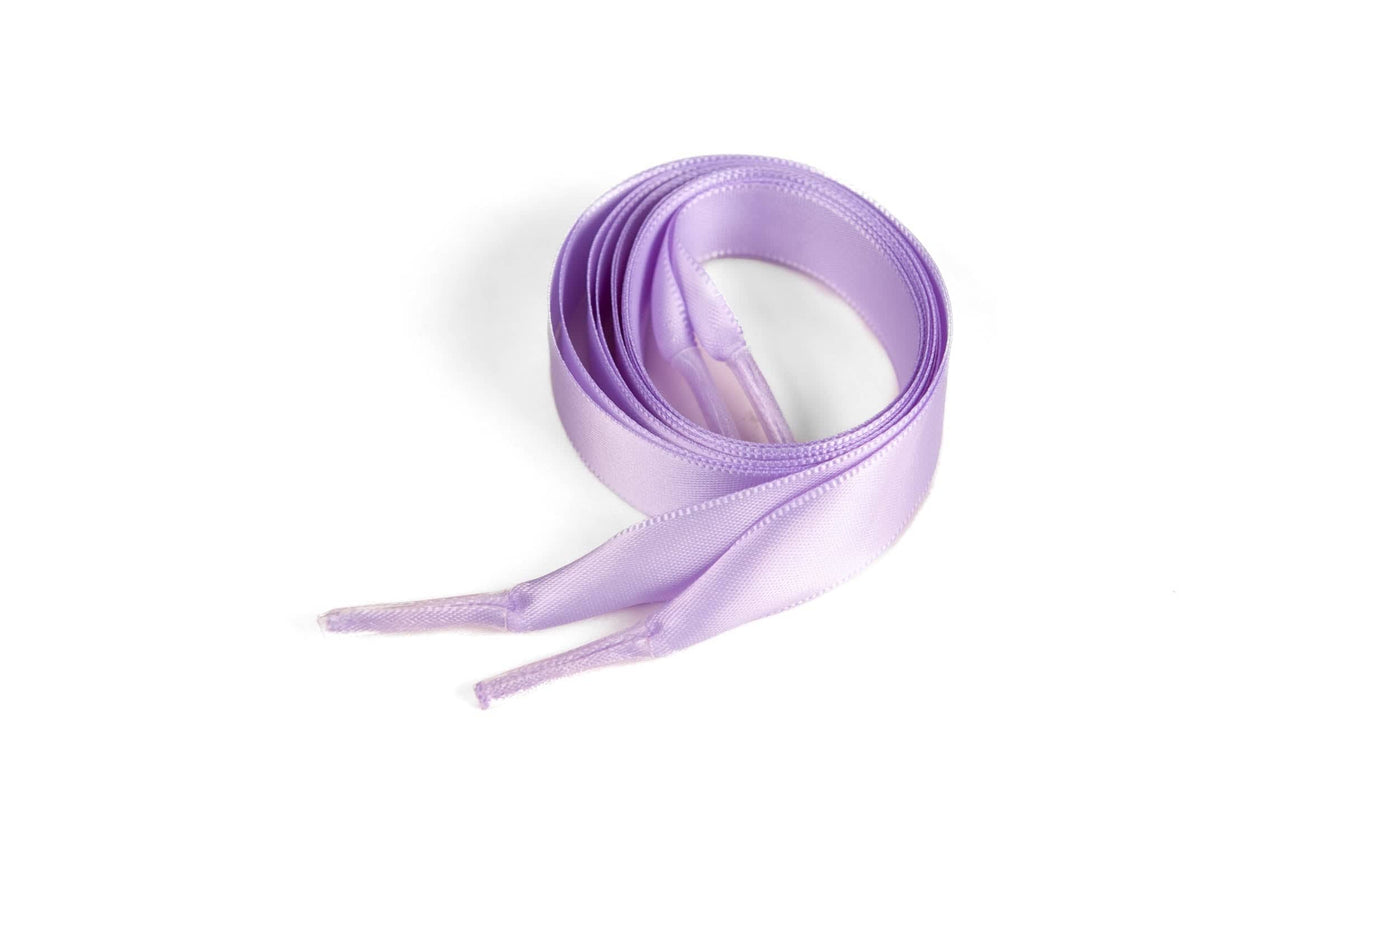 Satin Ribbon 5/8" Premium Quality Shoelaces - 36" Inch Length Orchid